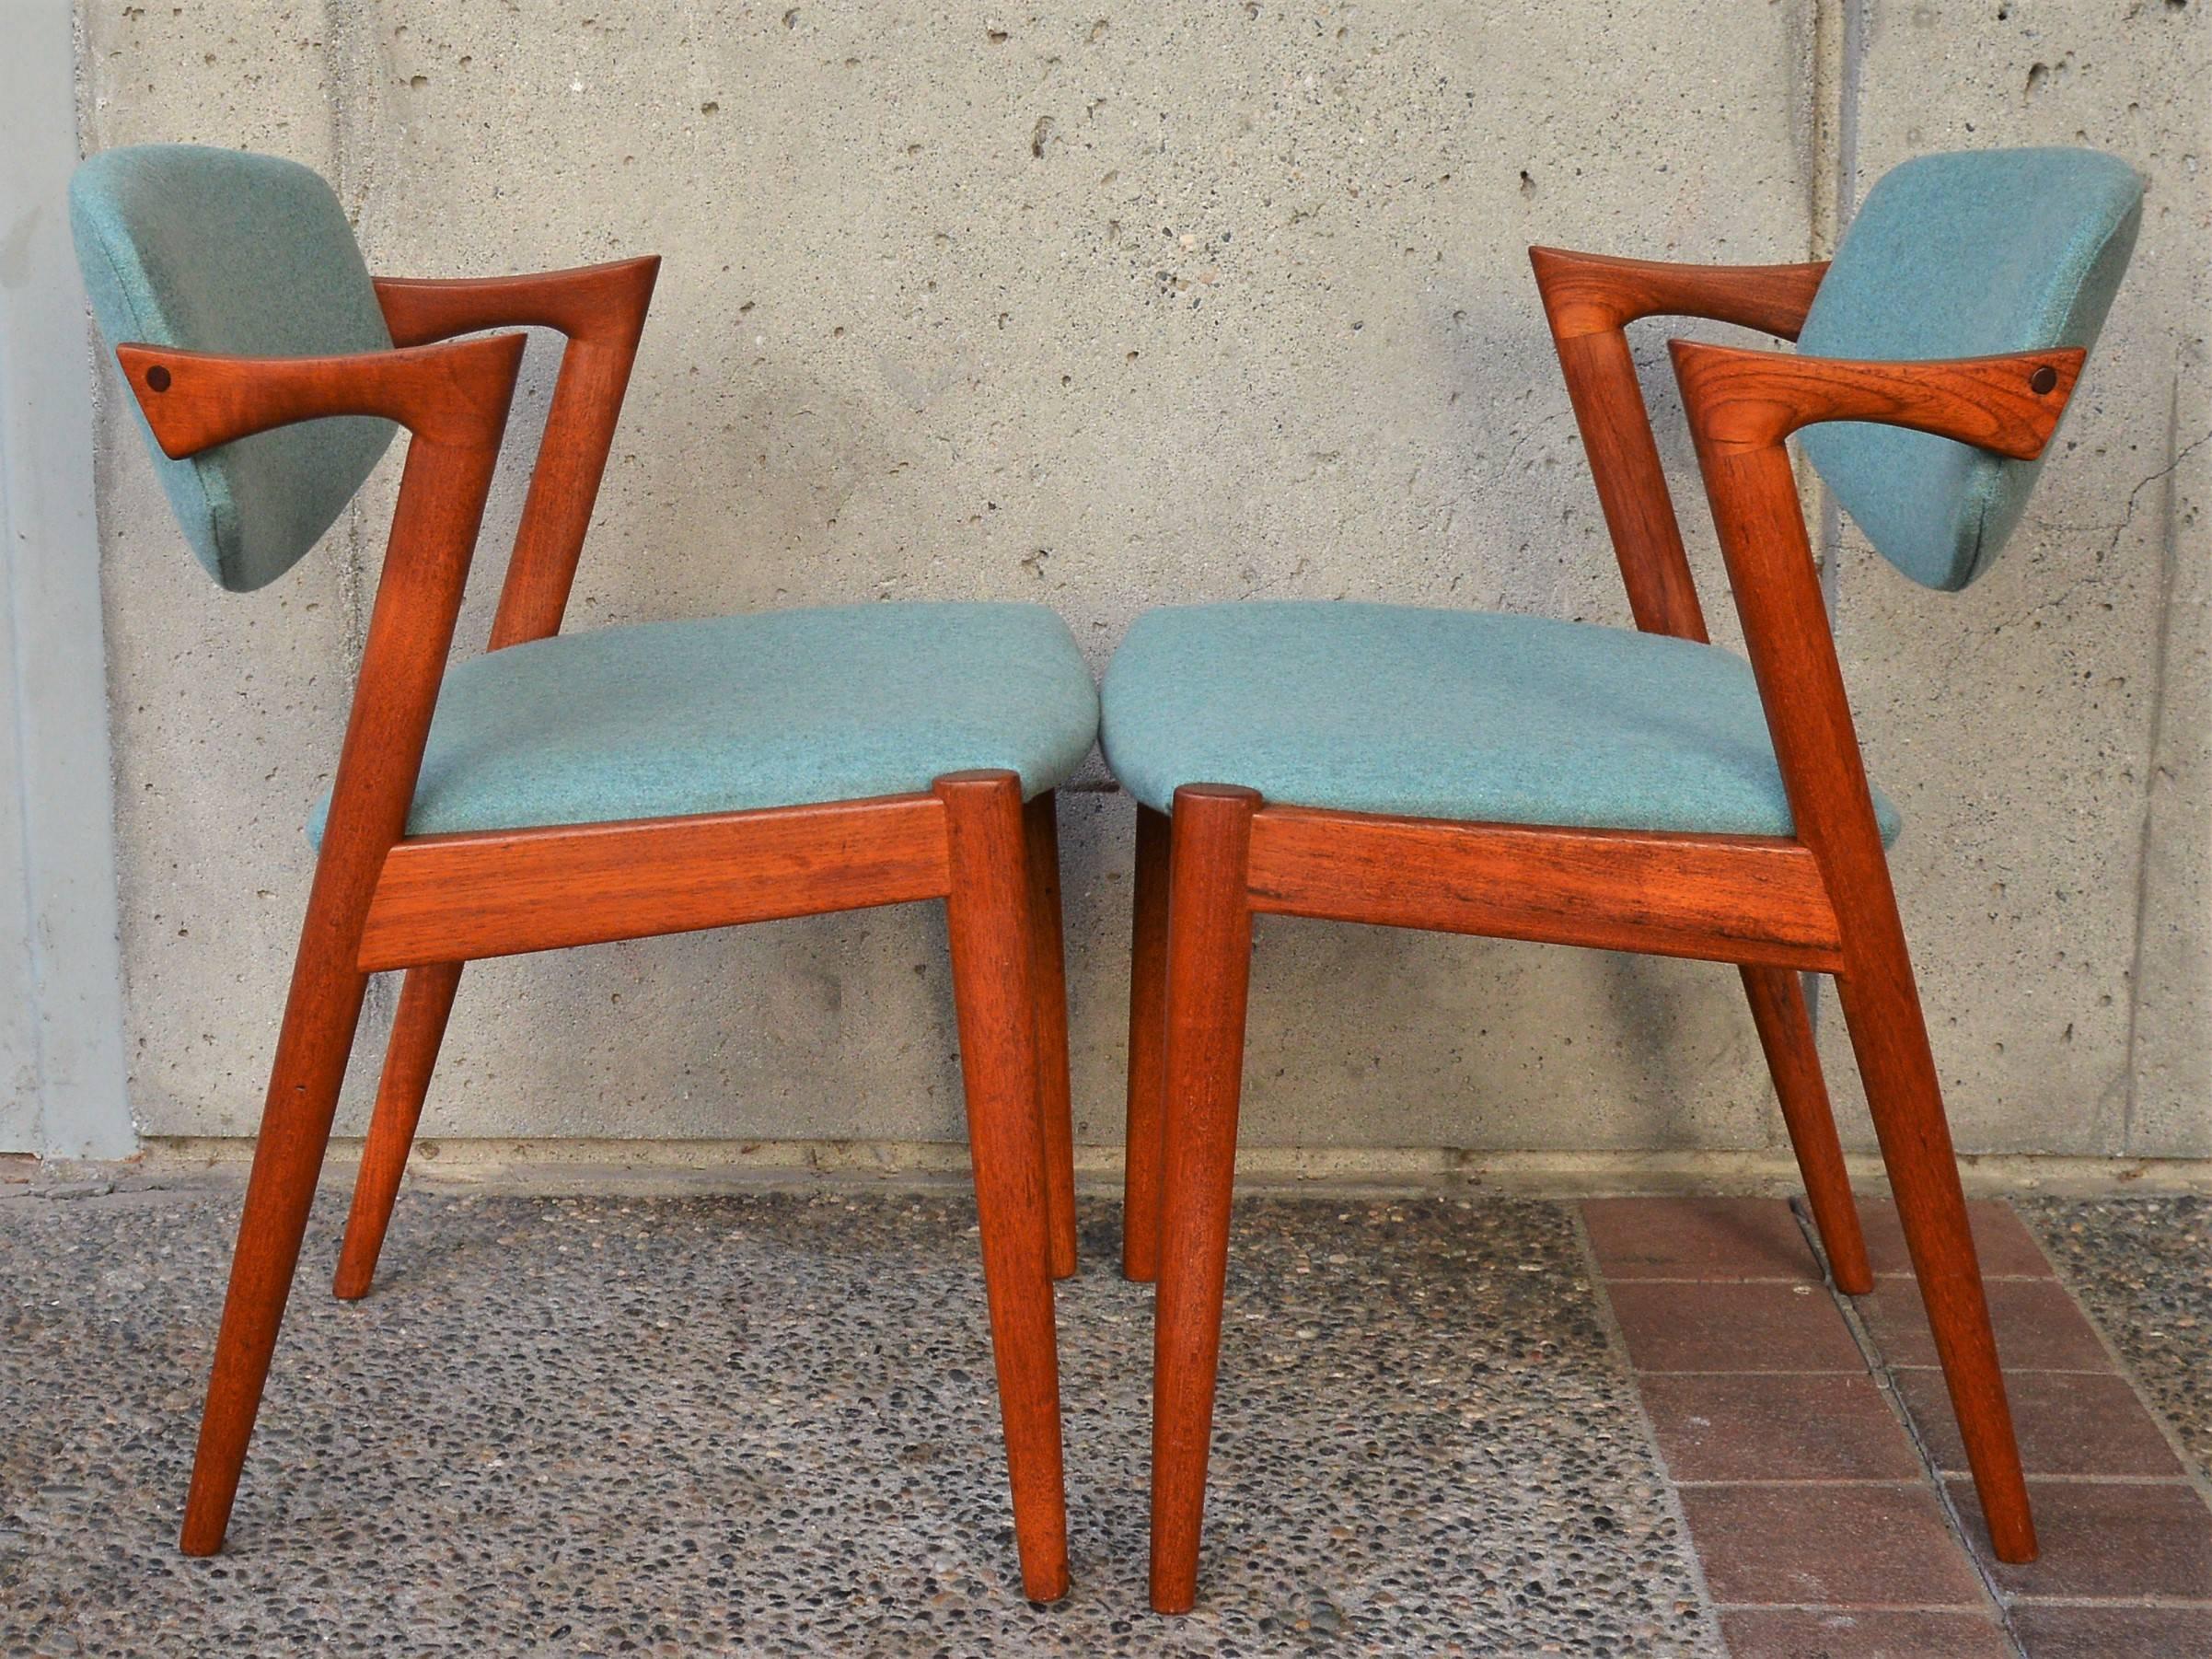 This incredible set of eight Danish Modern teak dining chairs were designed by Kai Kristiansen in the 1960s. Featuring gorgeous sculptural lines, such as the angled, truncated armrests, and the inwardly splayed back legs. The set has been reglued,